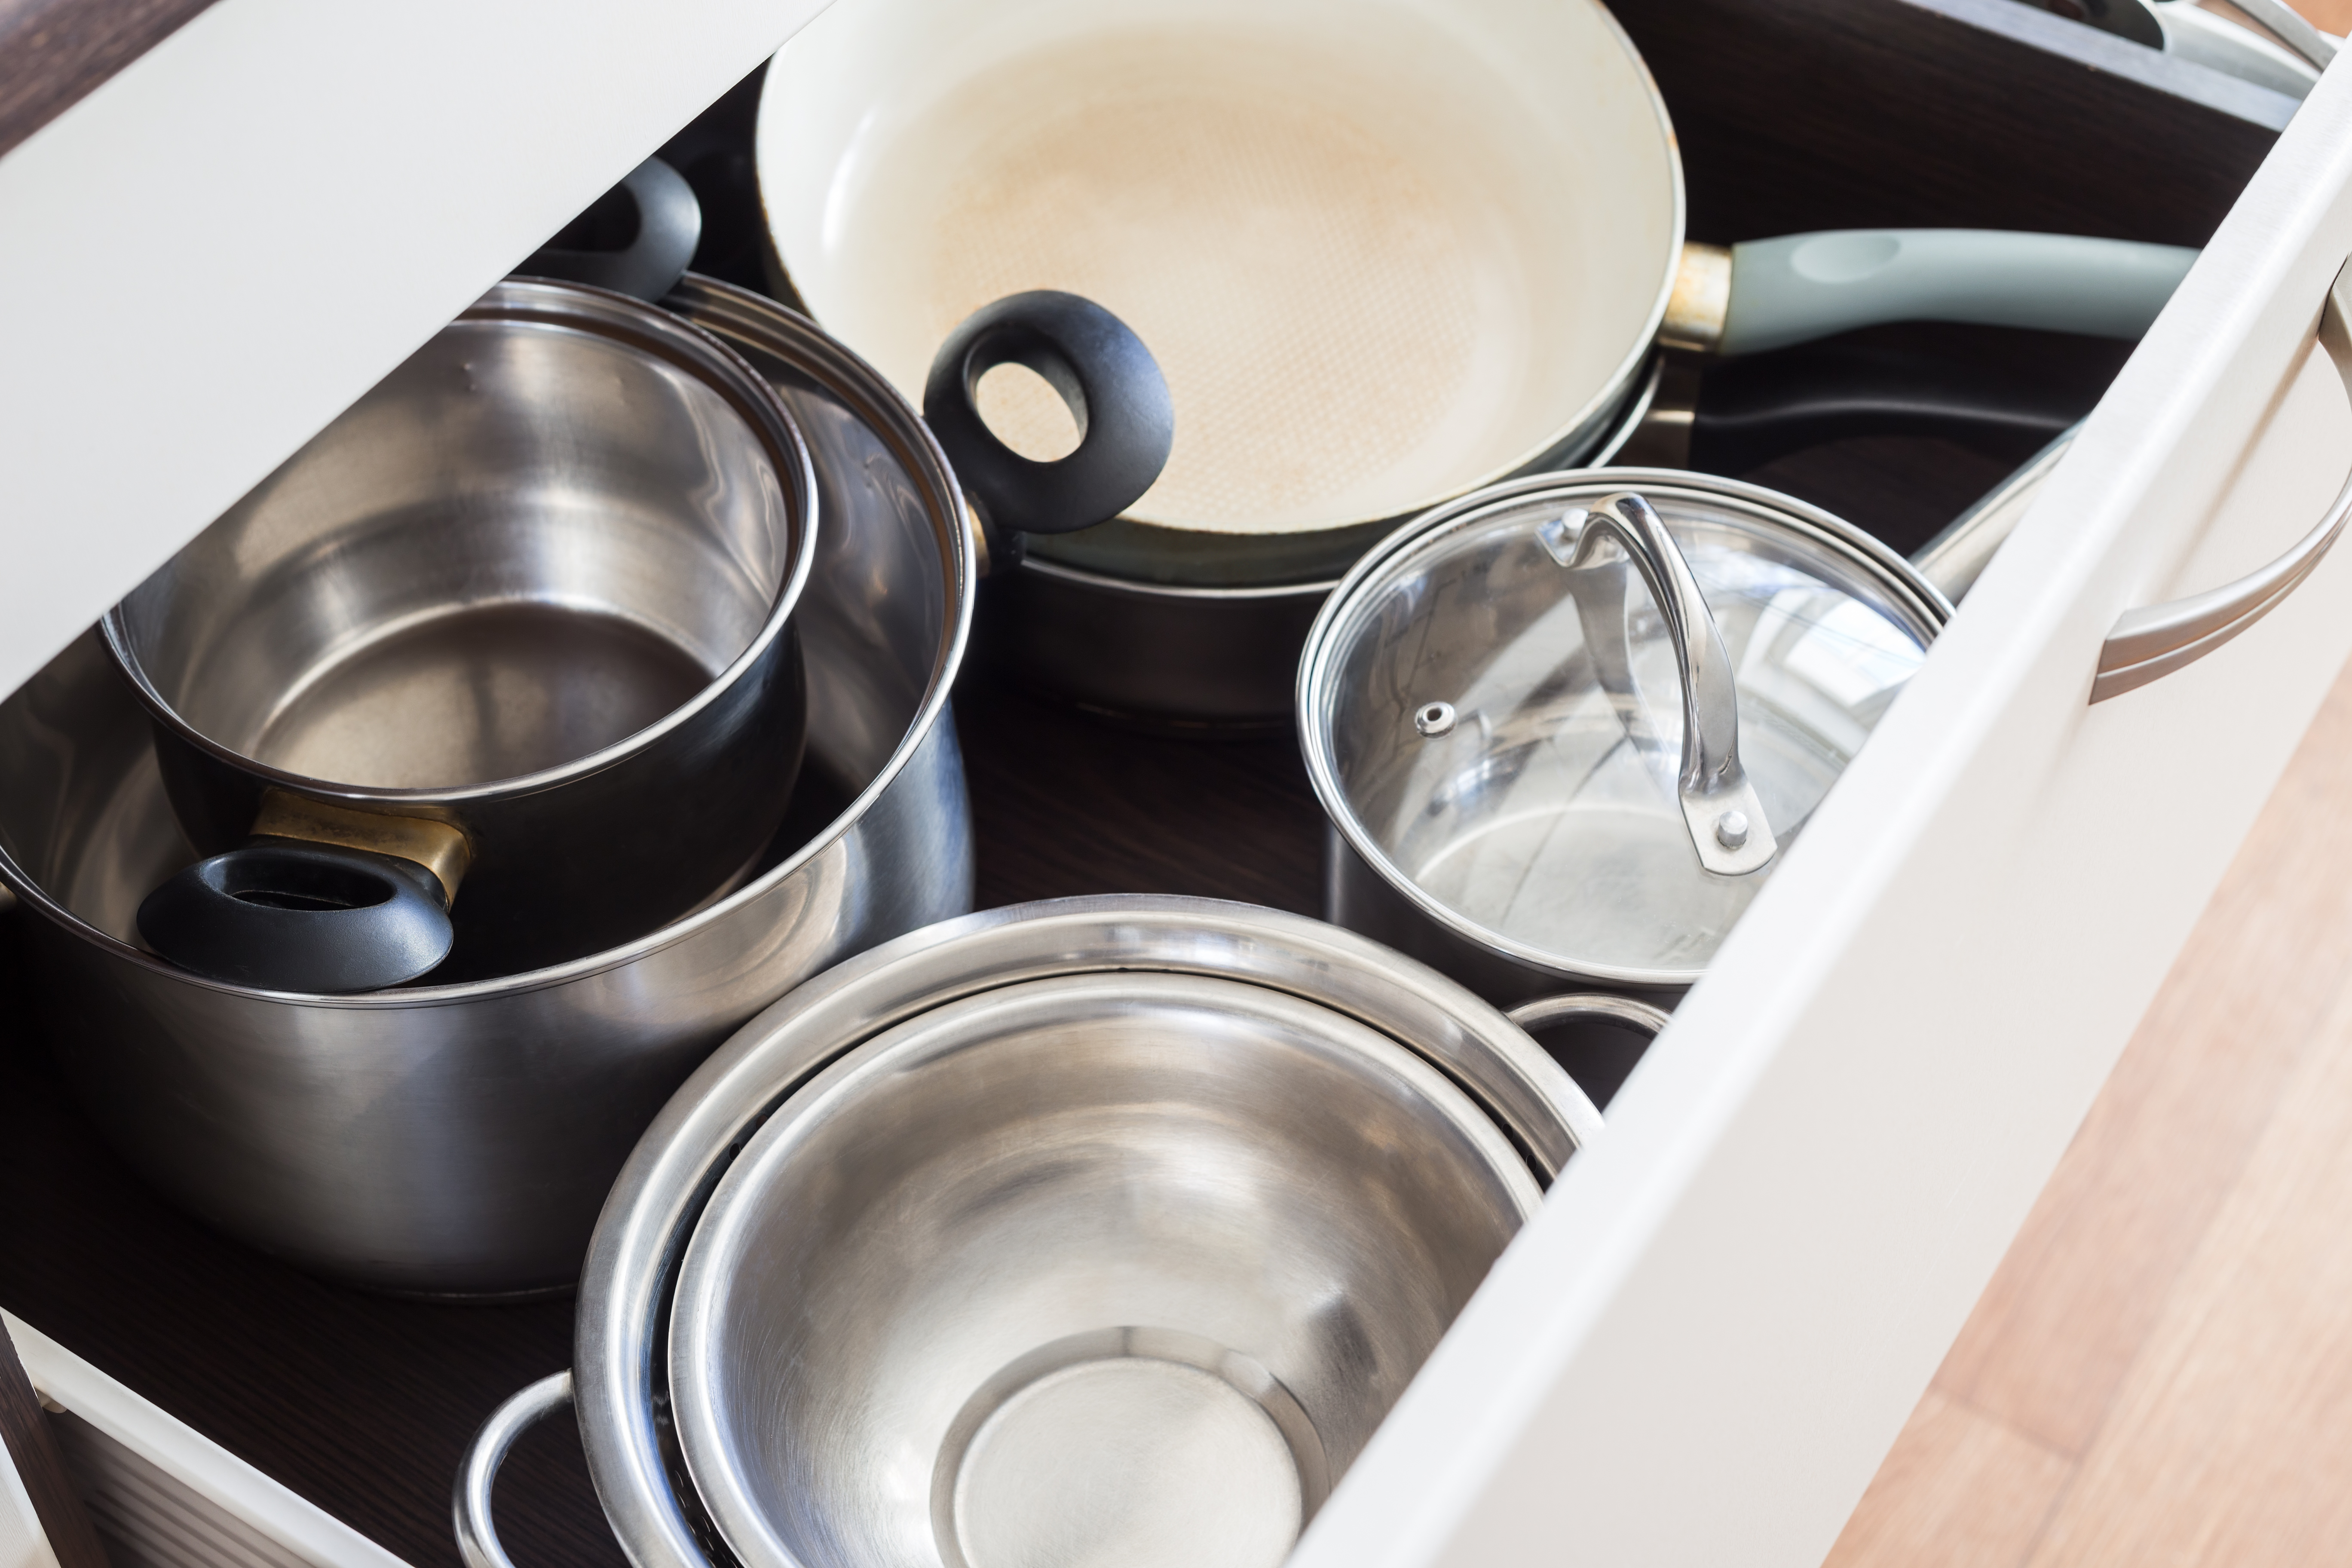 Organizing pots and pans: 10 ways to keep cookware neat